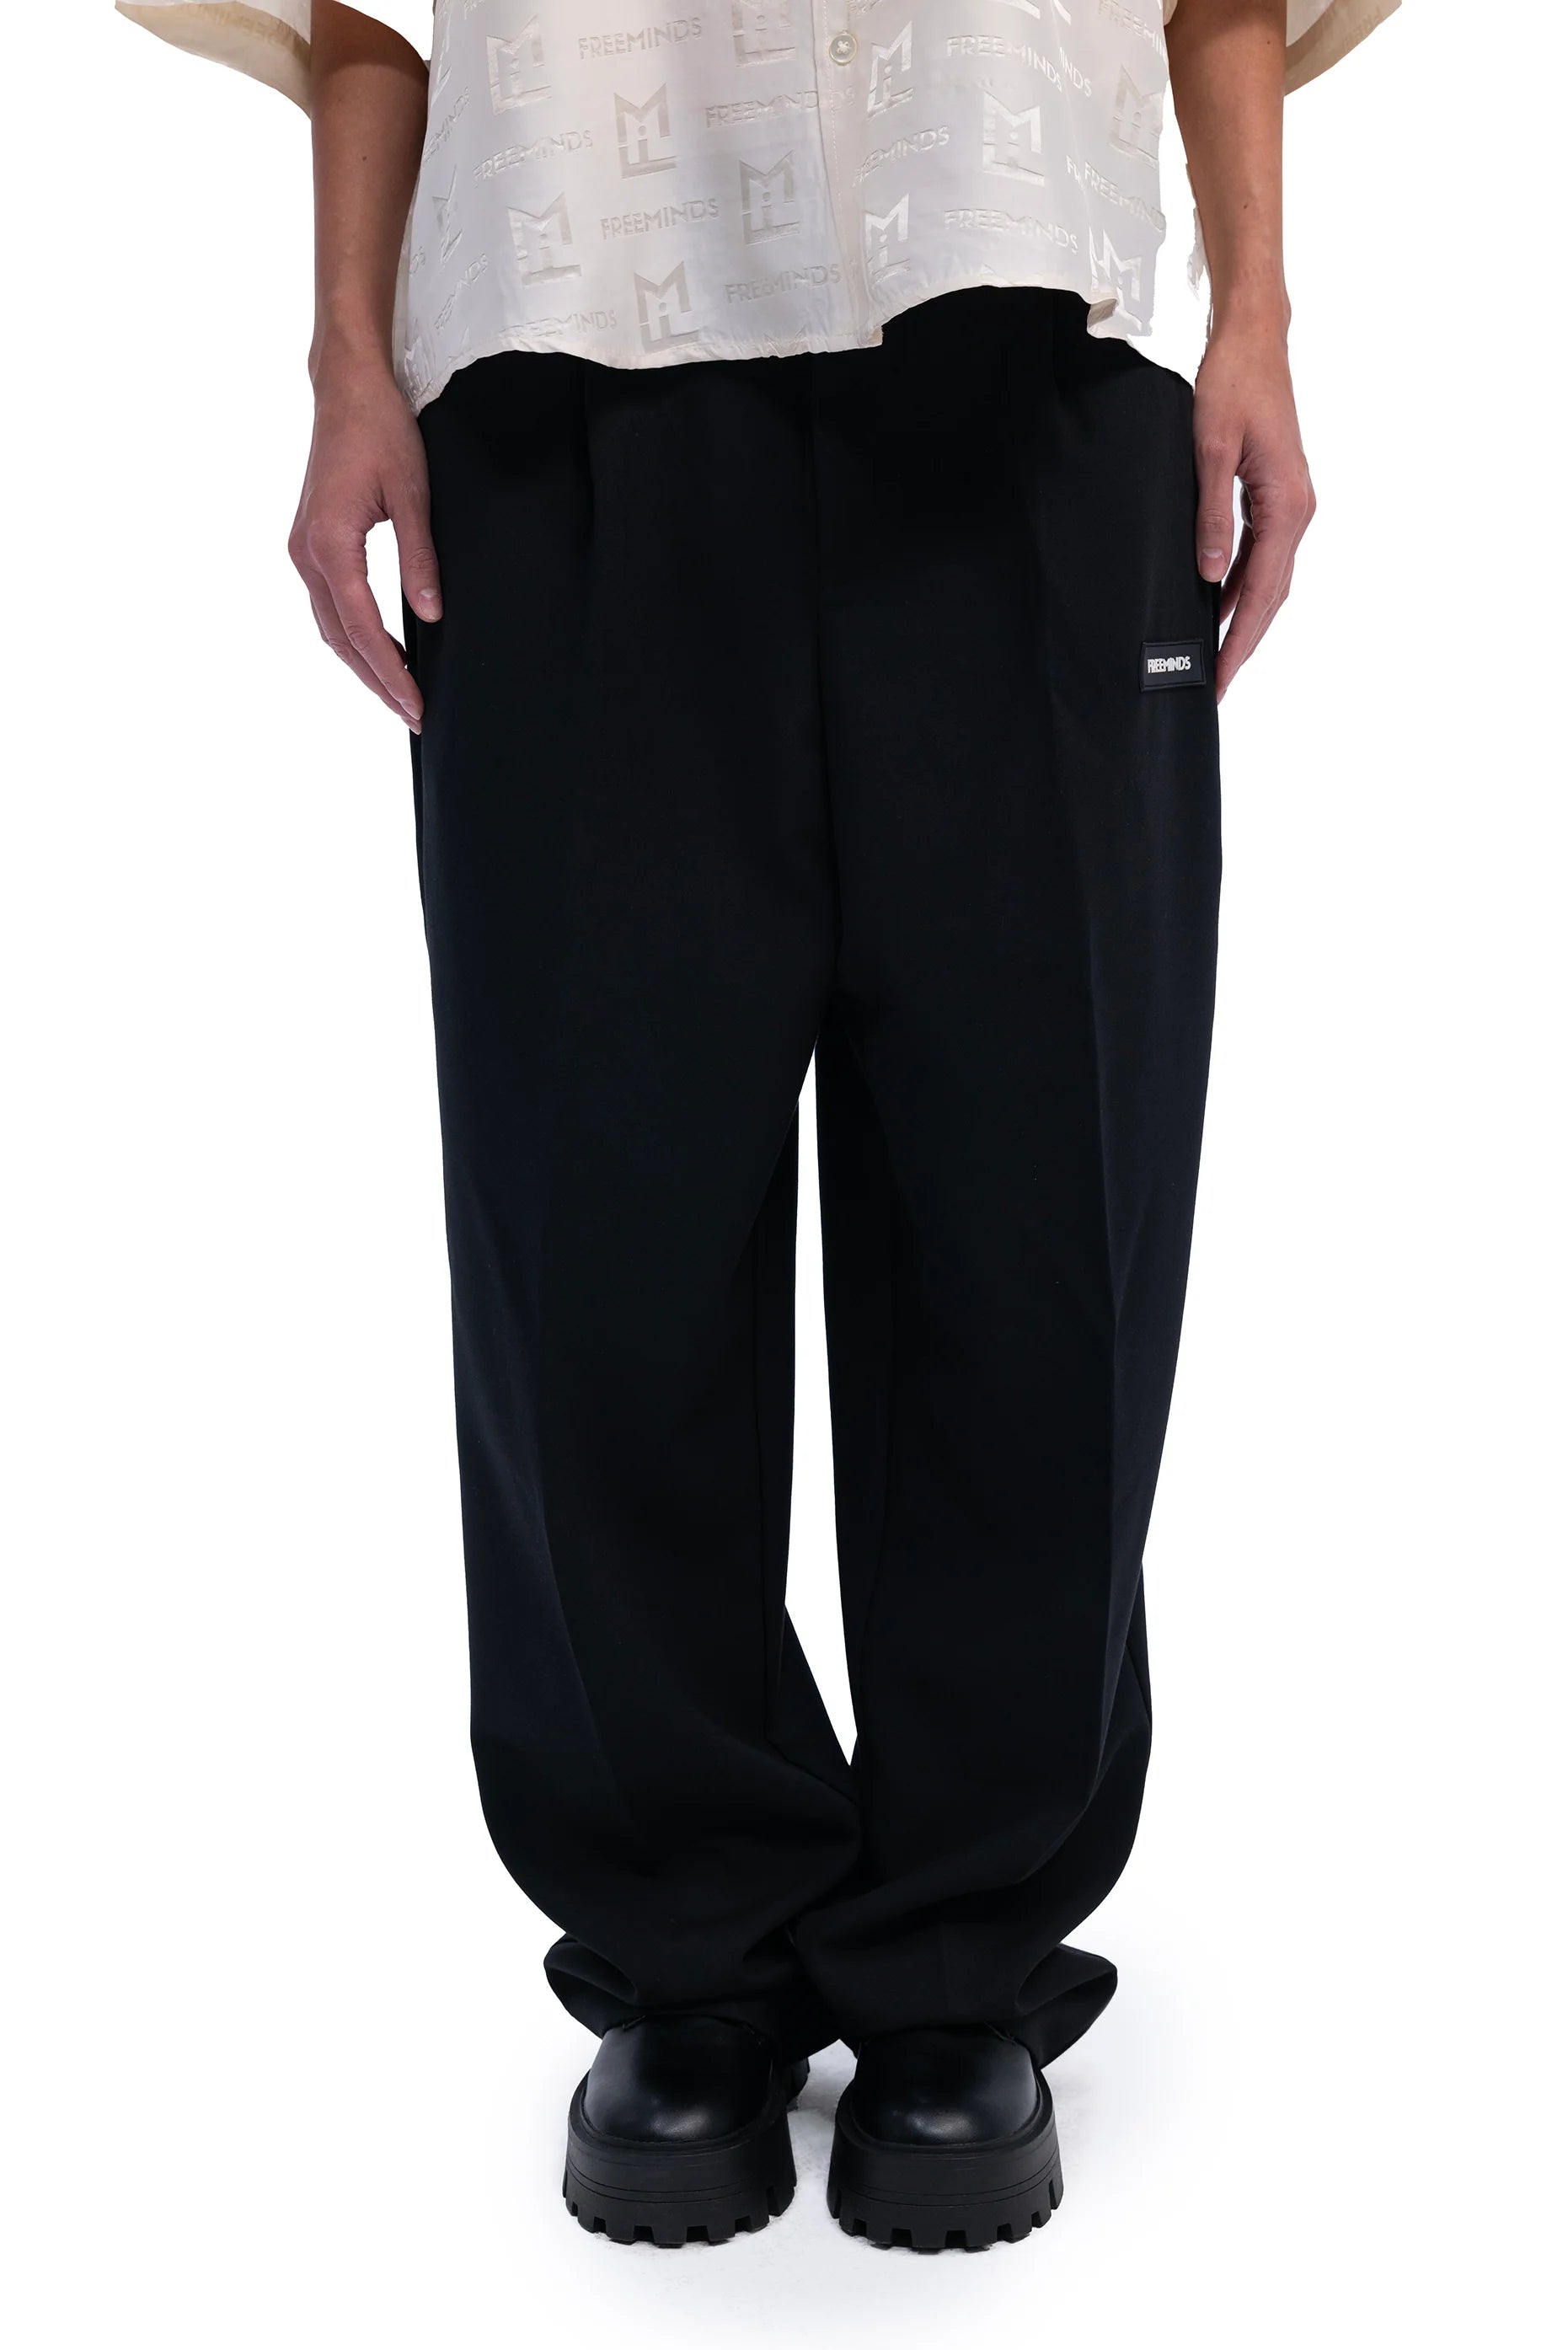 FREEMINDS UNISEX BLACK LARGE-FIT TAILORED TROUSERS